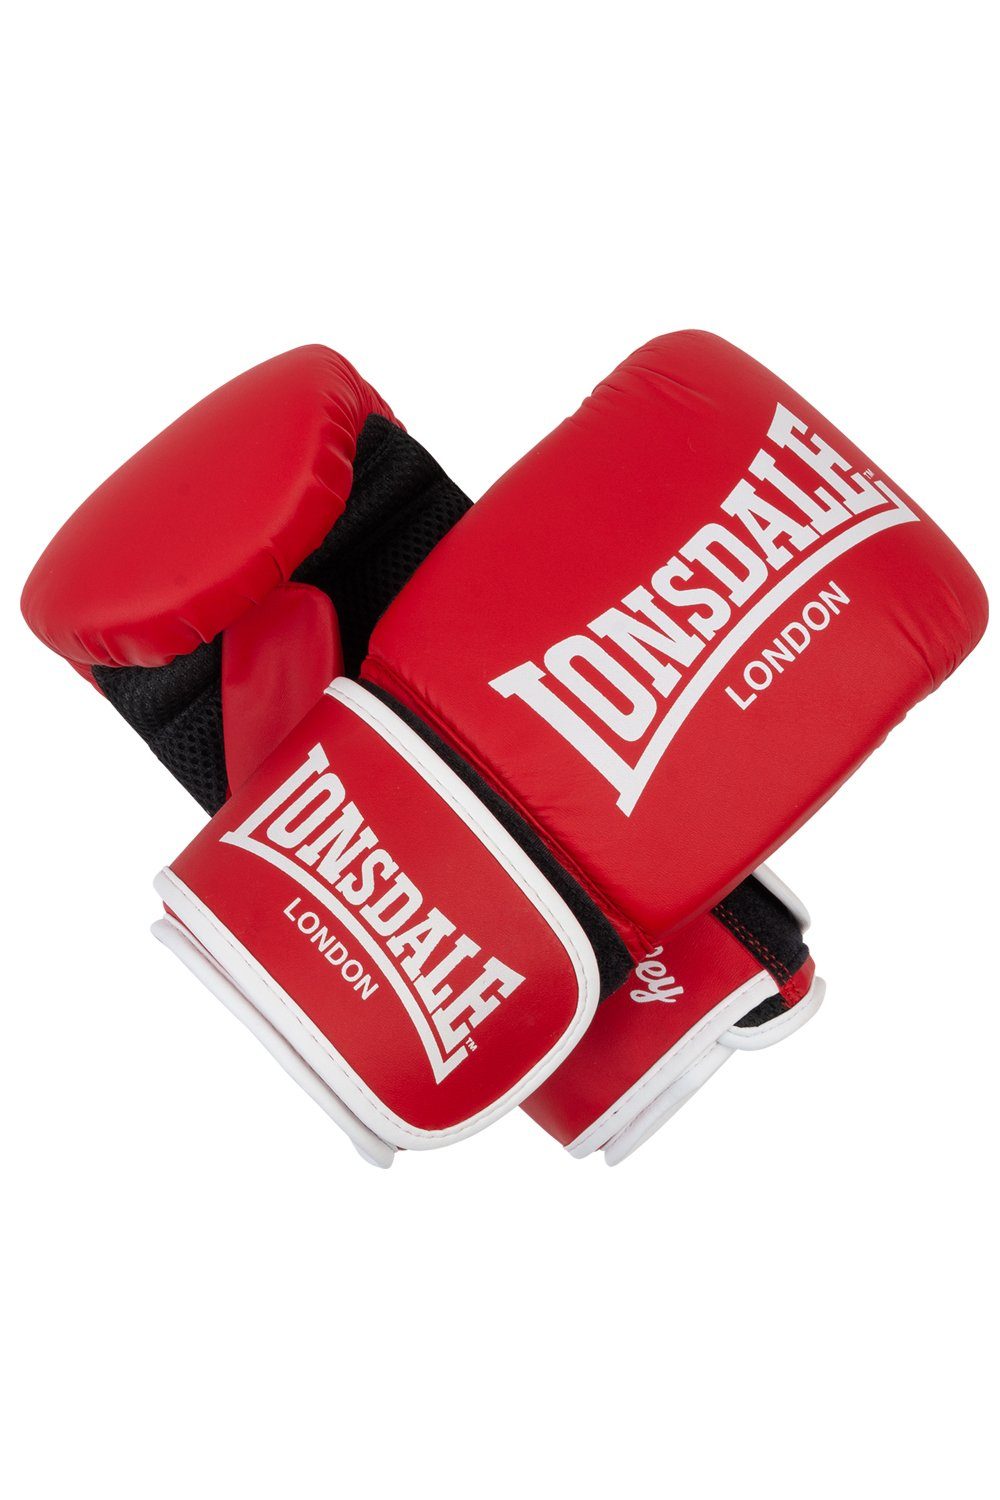 Lonsdale BARLEY Red/White Boxhandschuhe